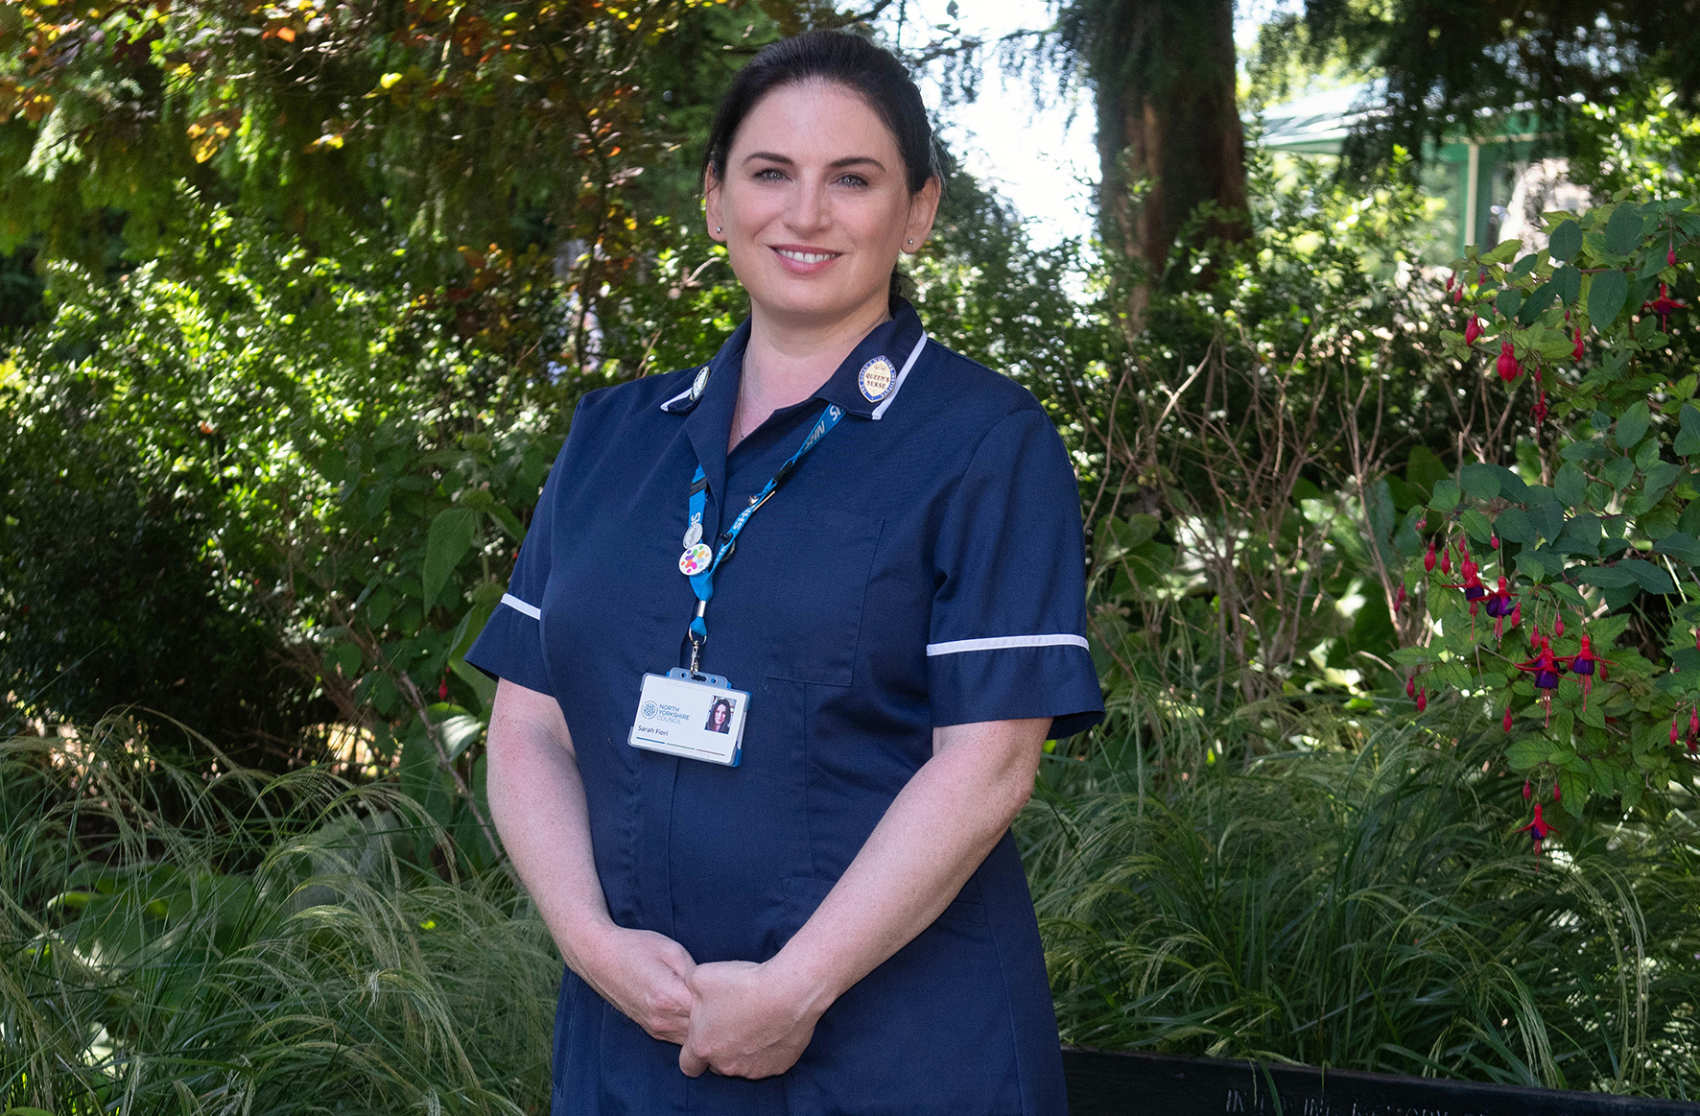 Sarah Fiori, principal nurse and head of the quality team at North Yorkshire Council, who has been honoured with the Chief Nurse Adult Social Care Gold Award